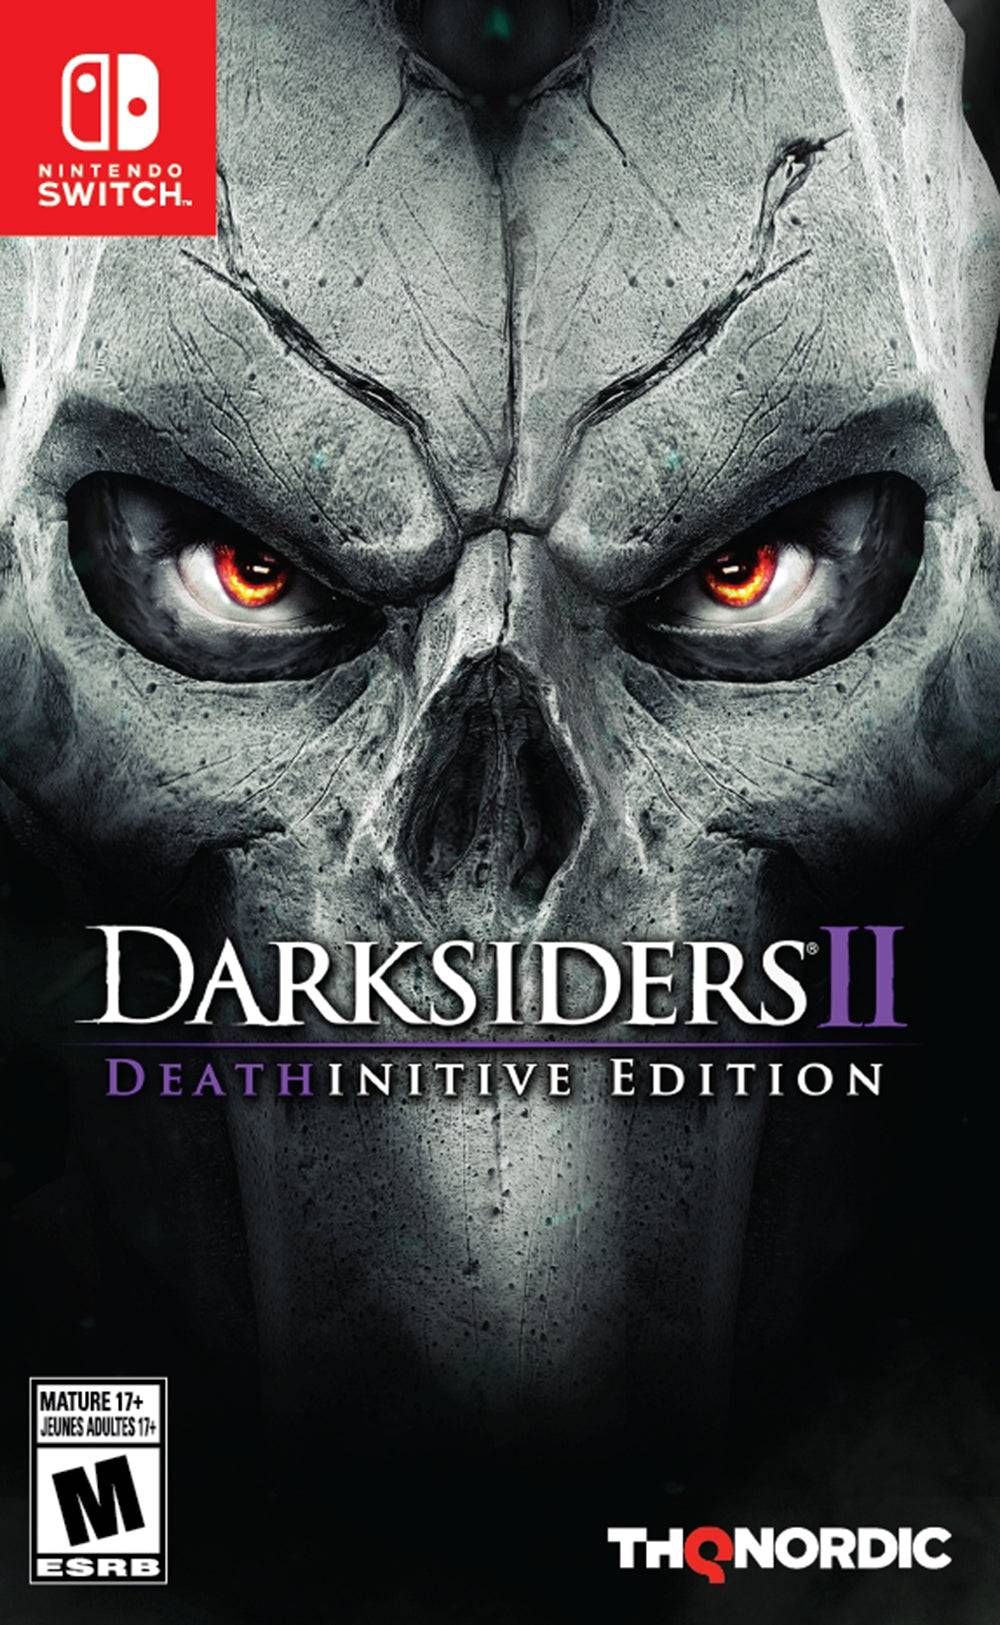 DARKSIDERS II 2 DEATHINITIVE EDITION (NINTENDO SWITCH) - jeux video game-x